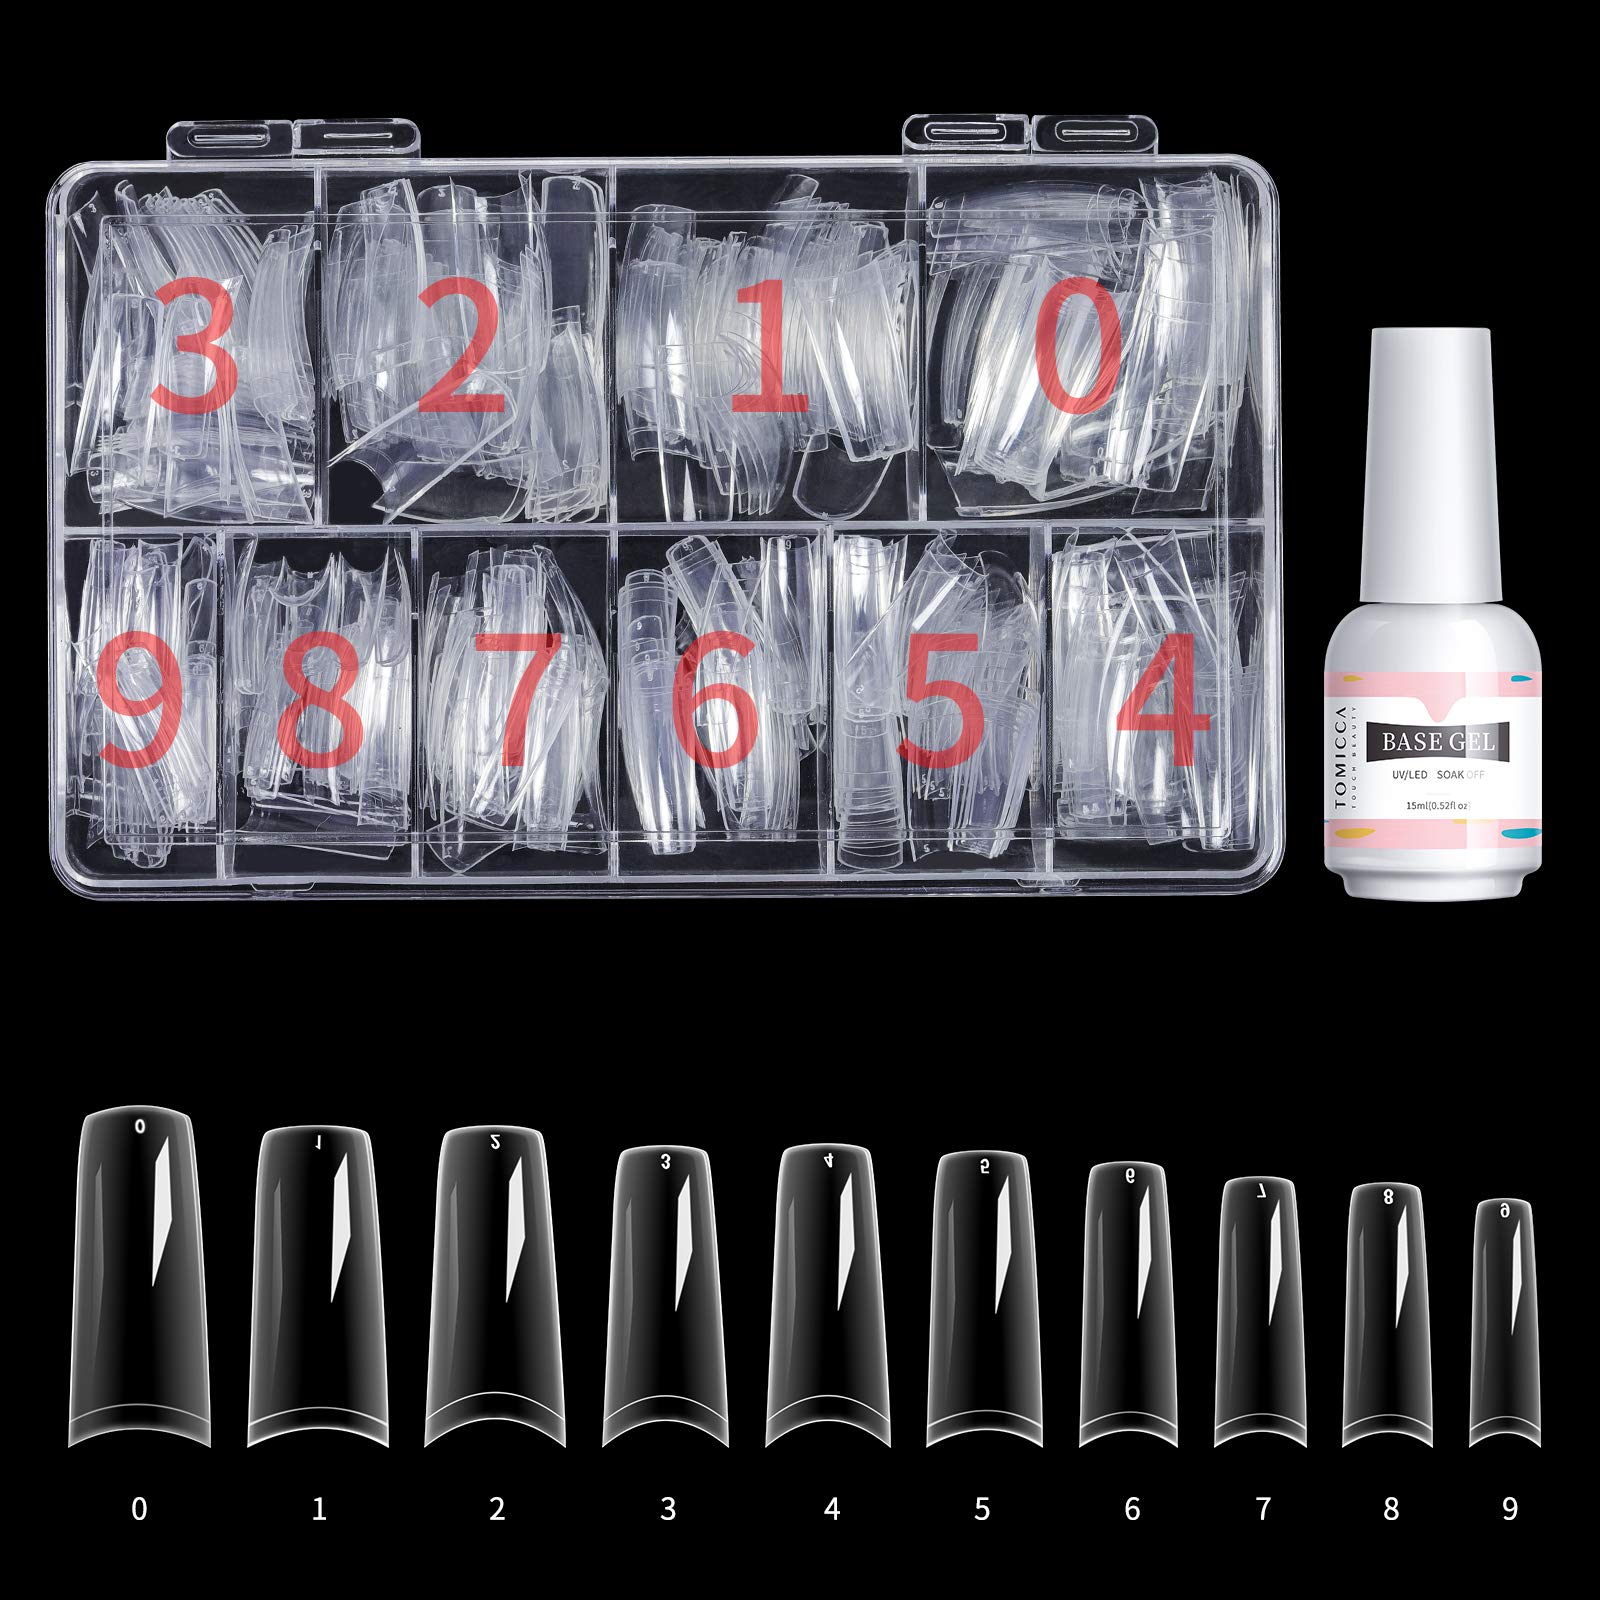 Beetles Gel Nail Polish Starter Kit with UV Nail Light Nail Extension Set,  6 Nude Colors Gel Polish Manicure Kit, 2 In 1 Base Gel Nail Glue + Top Coat  with Coffin